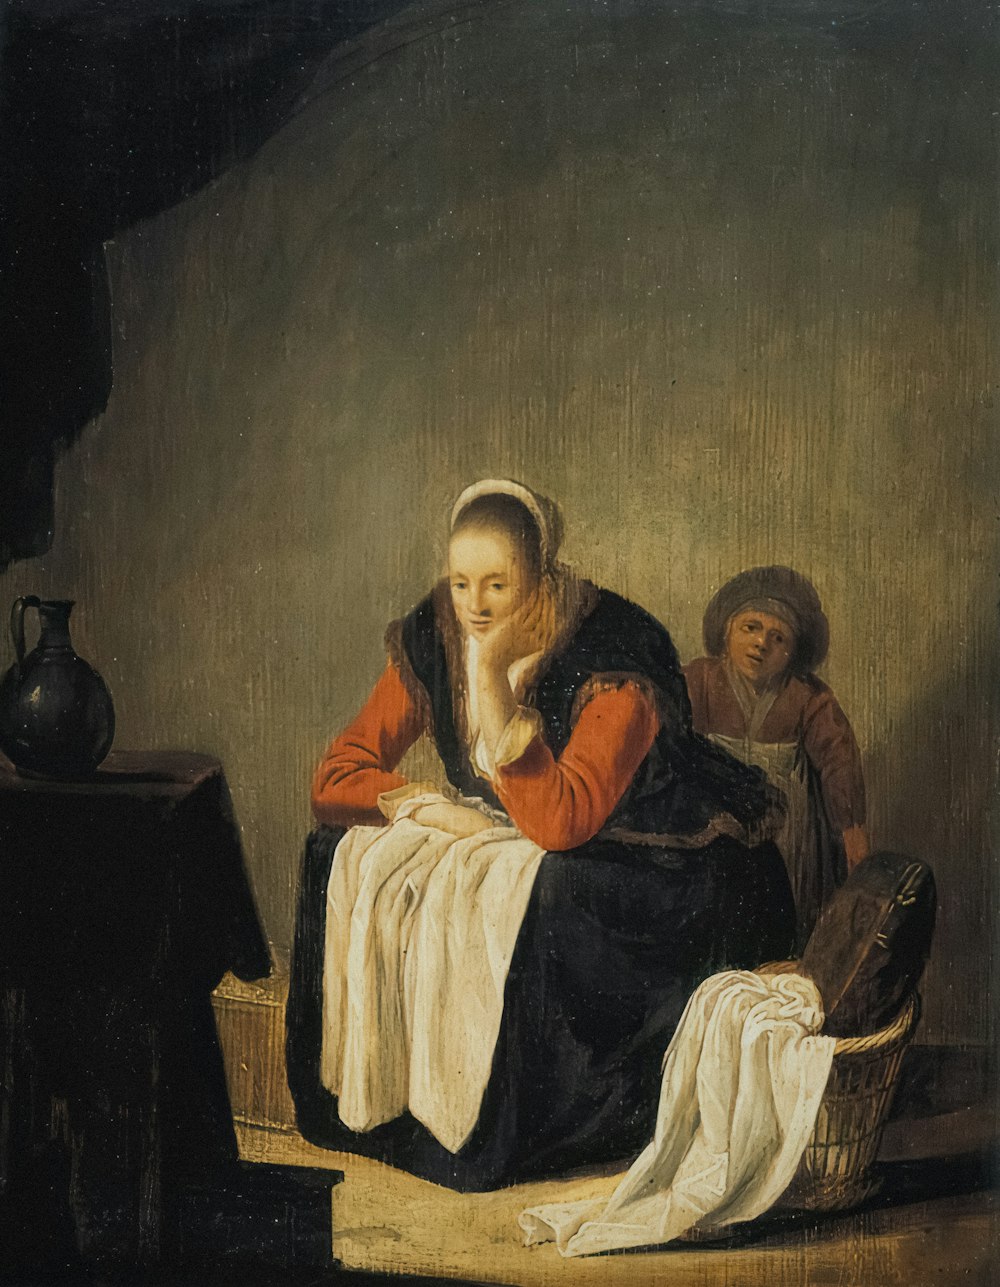 a painting of a woman sitting on a floor next to a child